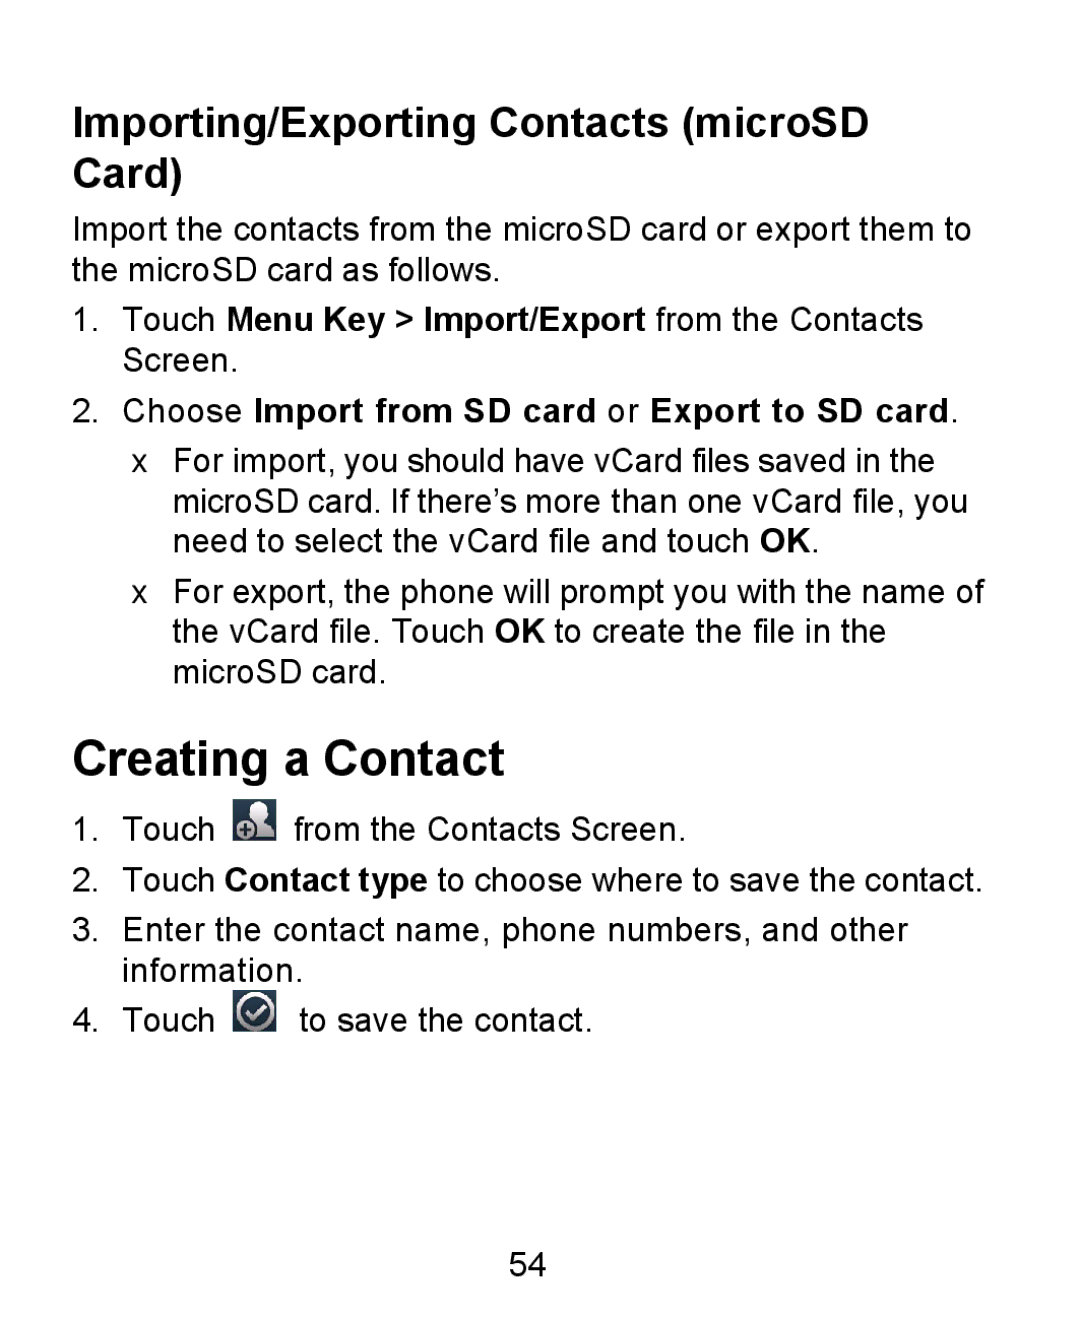 ZTE KIS user manual Creating a Contact, Importing/Exporting Contacts microSD Card 